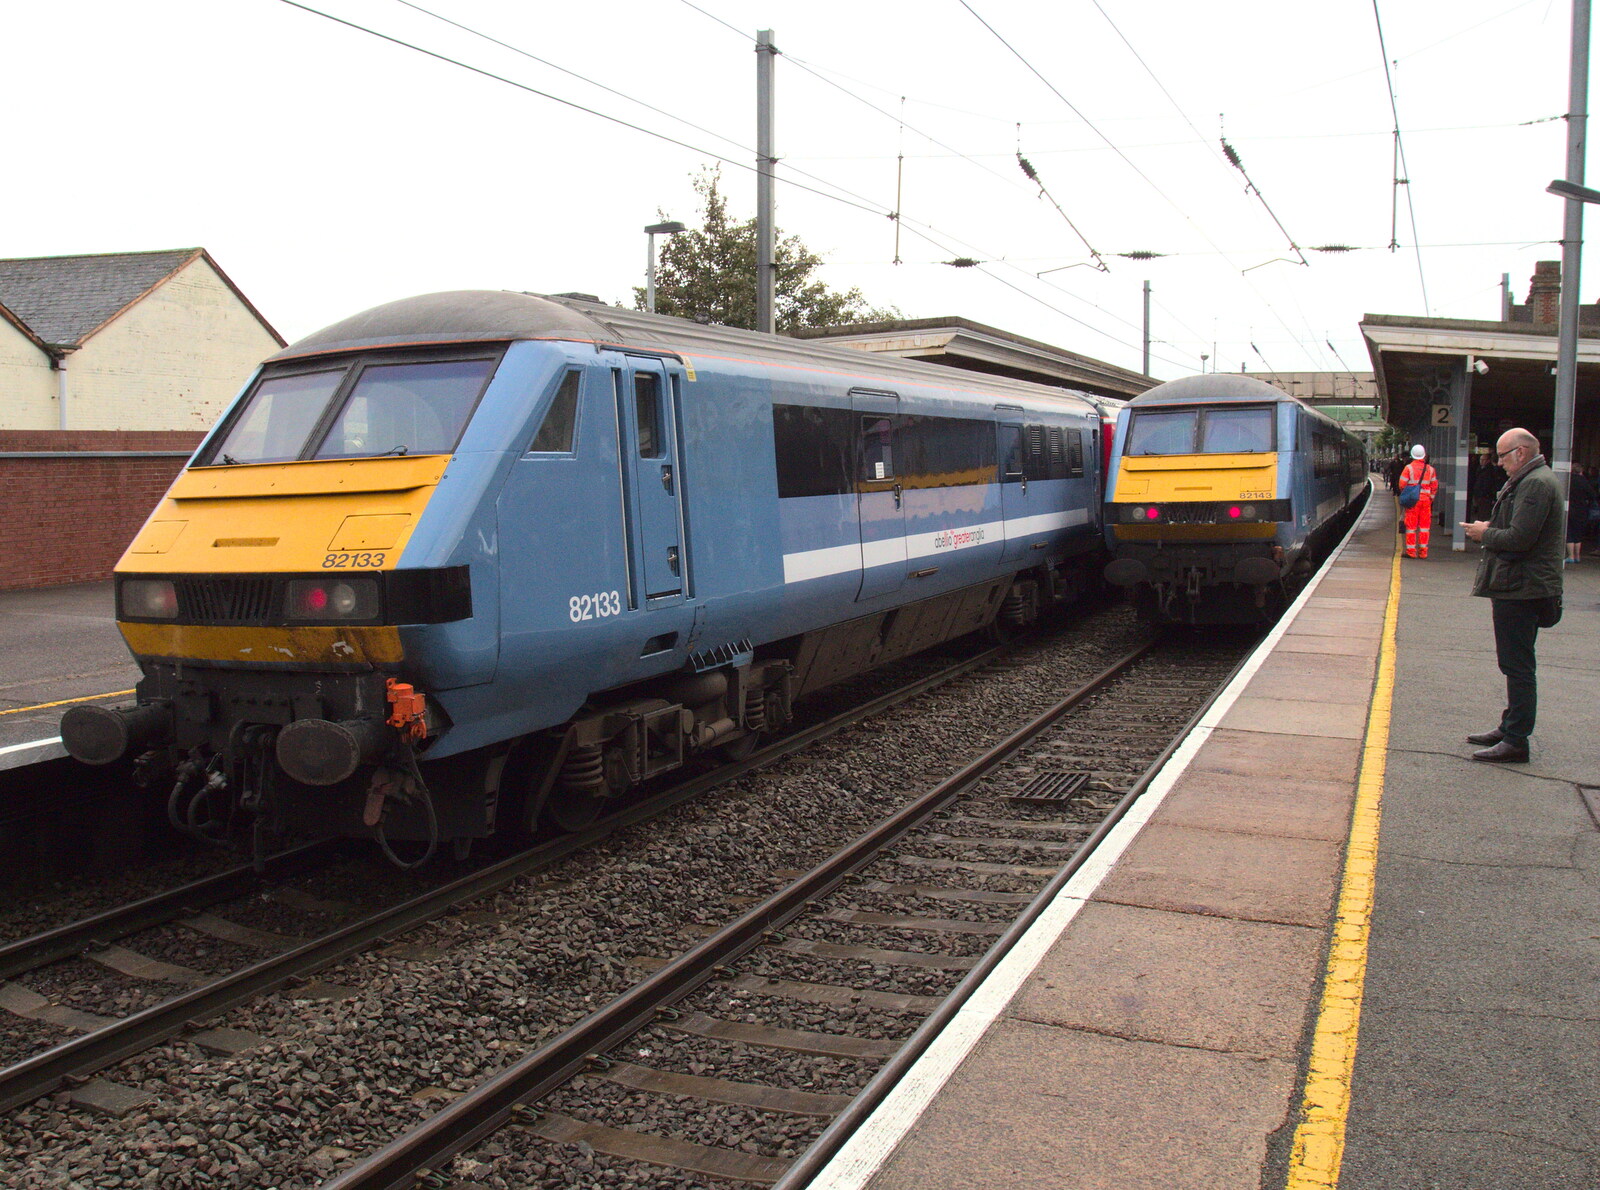 The rare sight of two DVTs at the same end from (Very) Long Train (Not) Running, Stowmarket, Suffolk - 21st October 2014